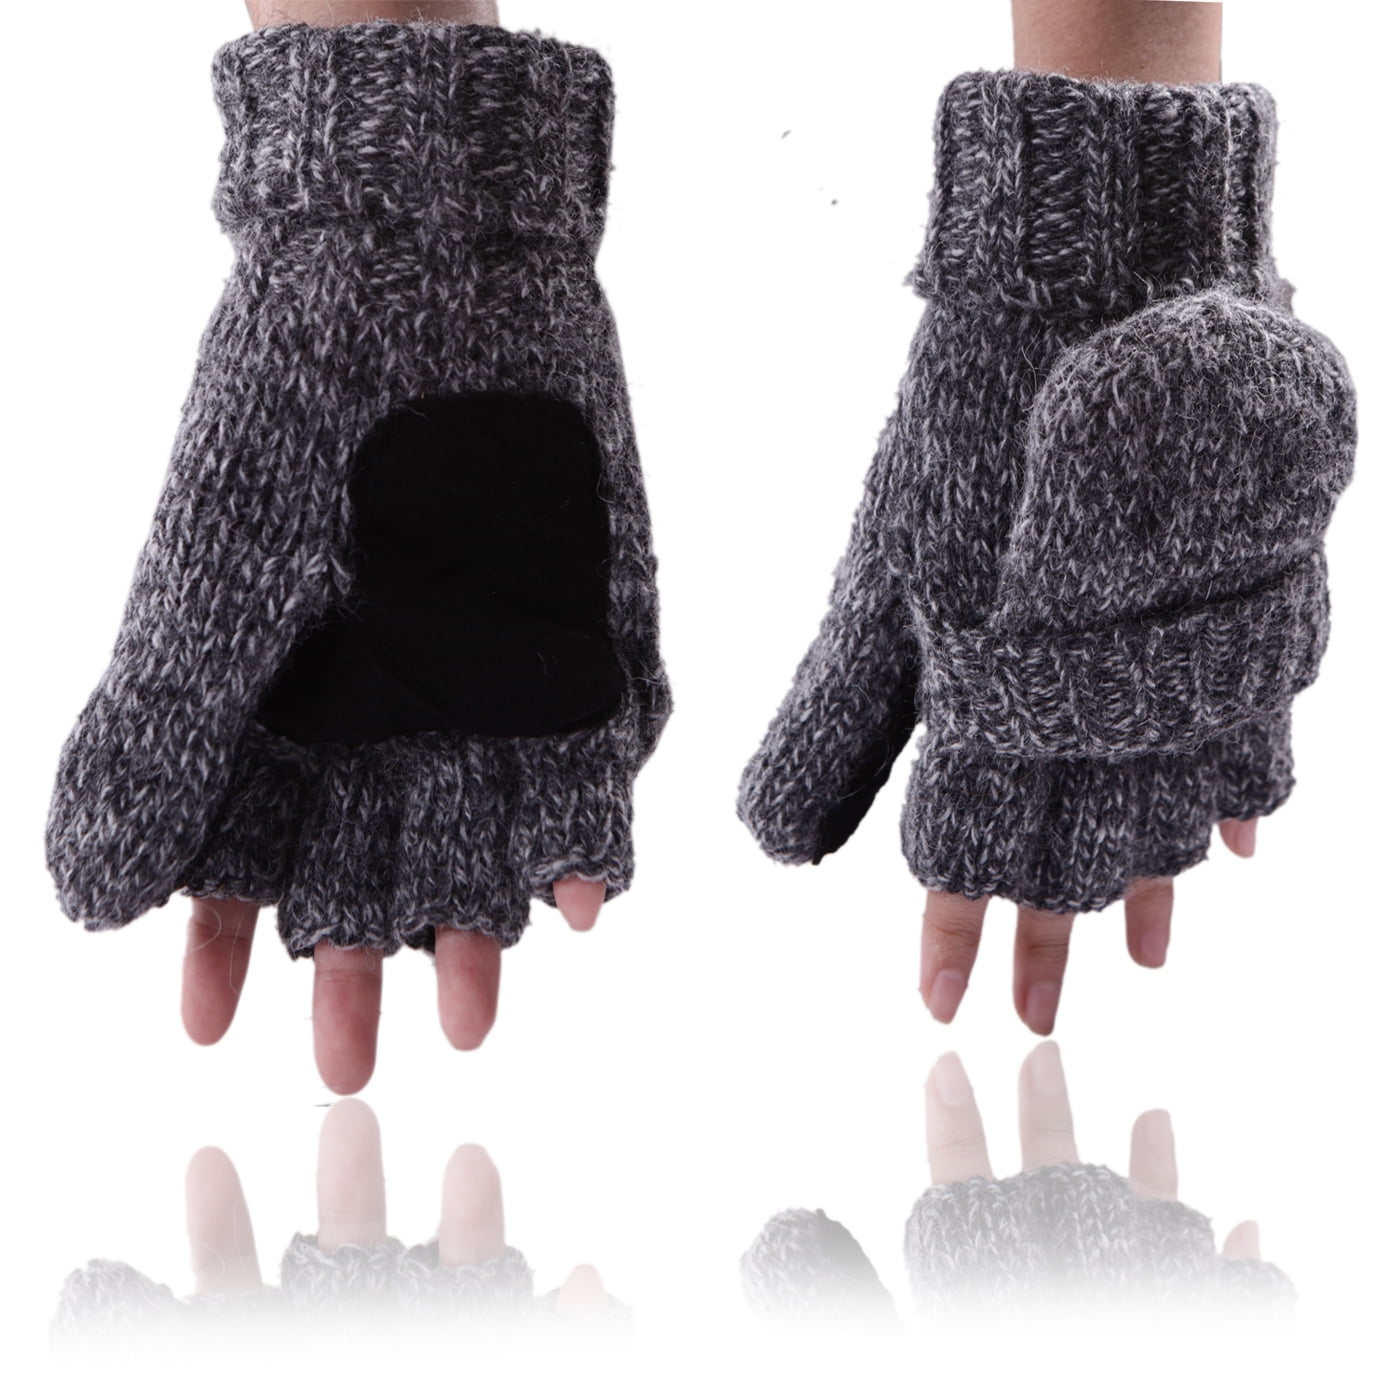 Black Fingerless Knit Gloves For Snow Texting Or Riding 